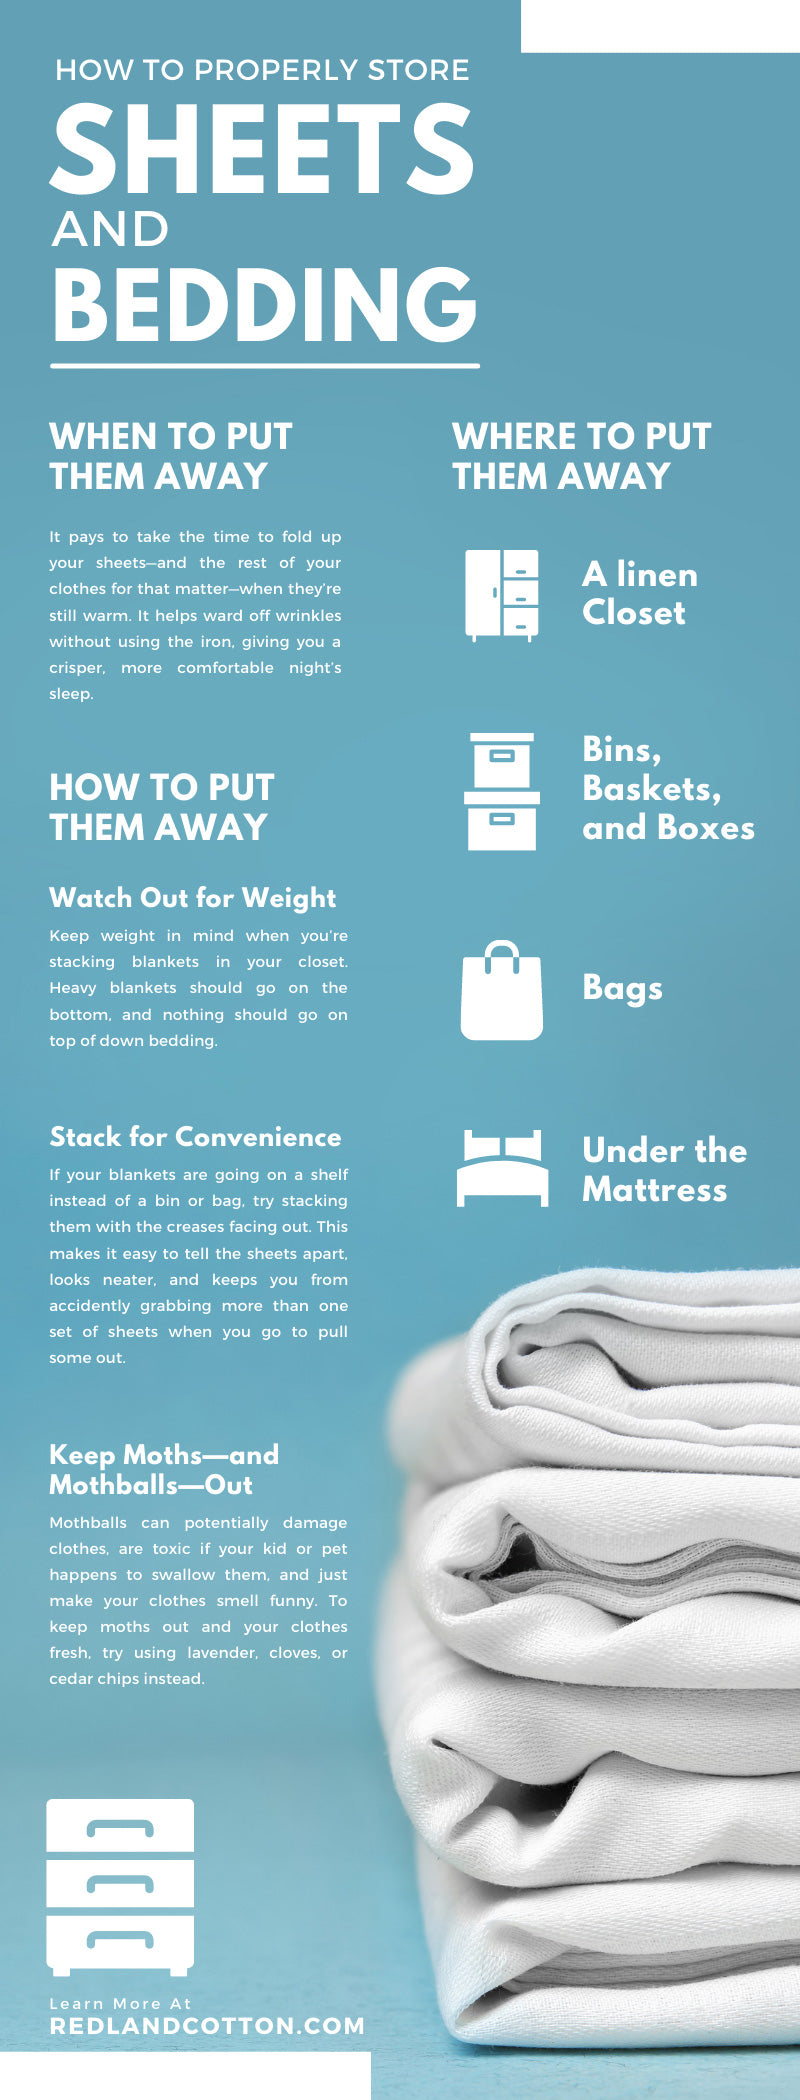 How To Properly Store Sheets and Bedding